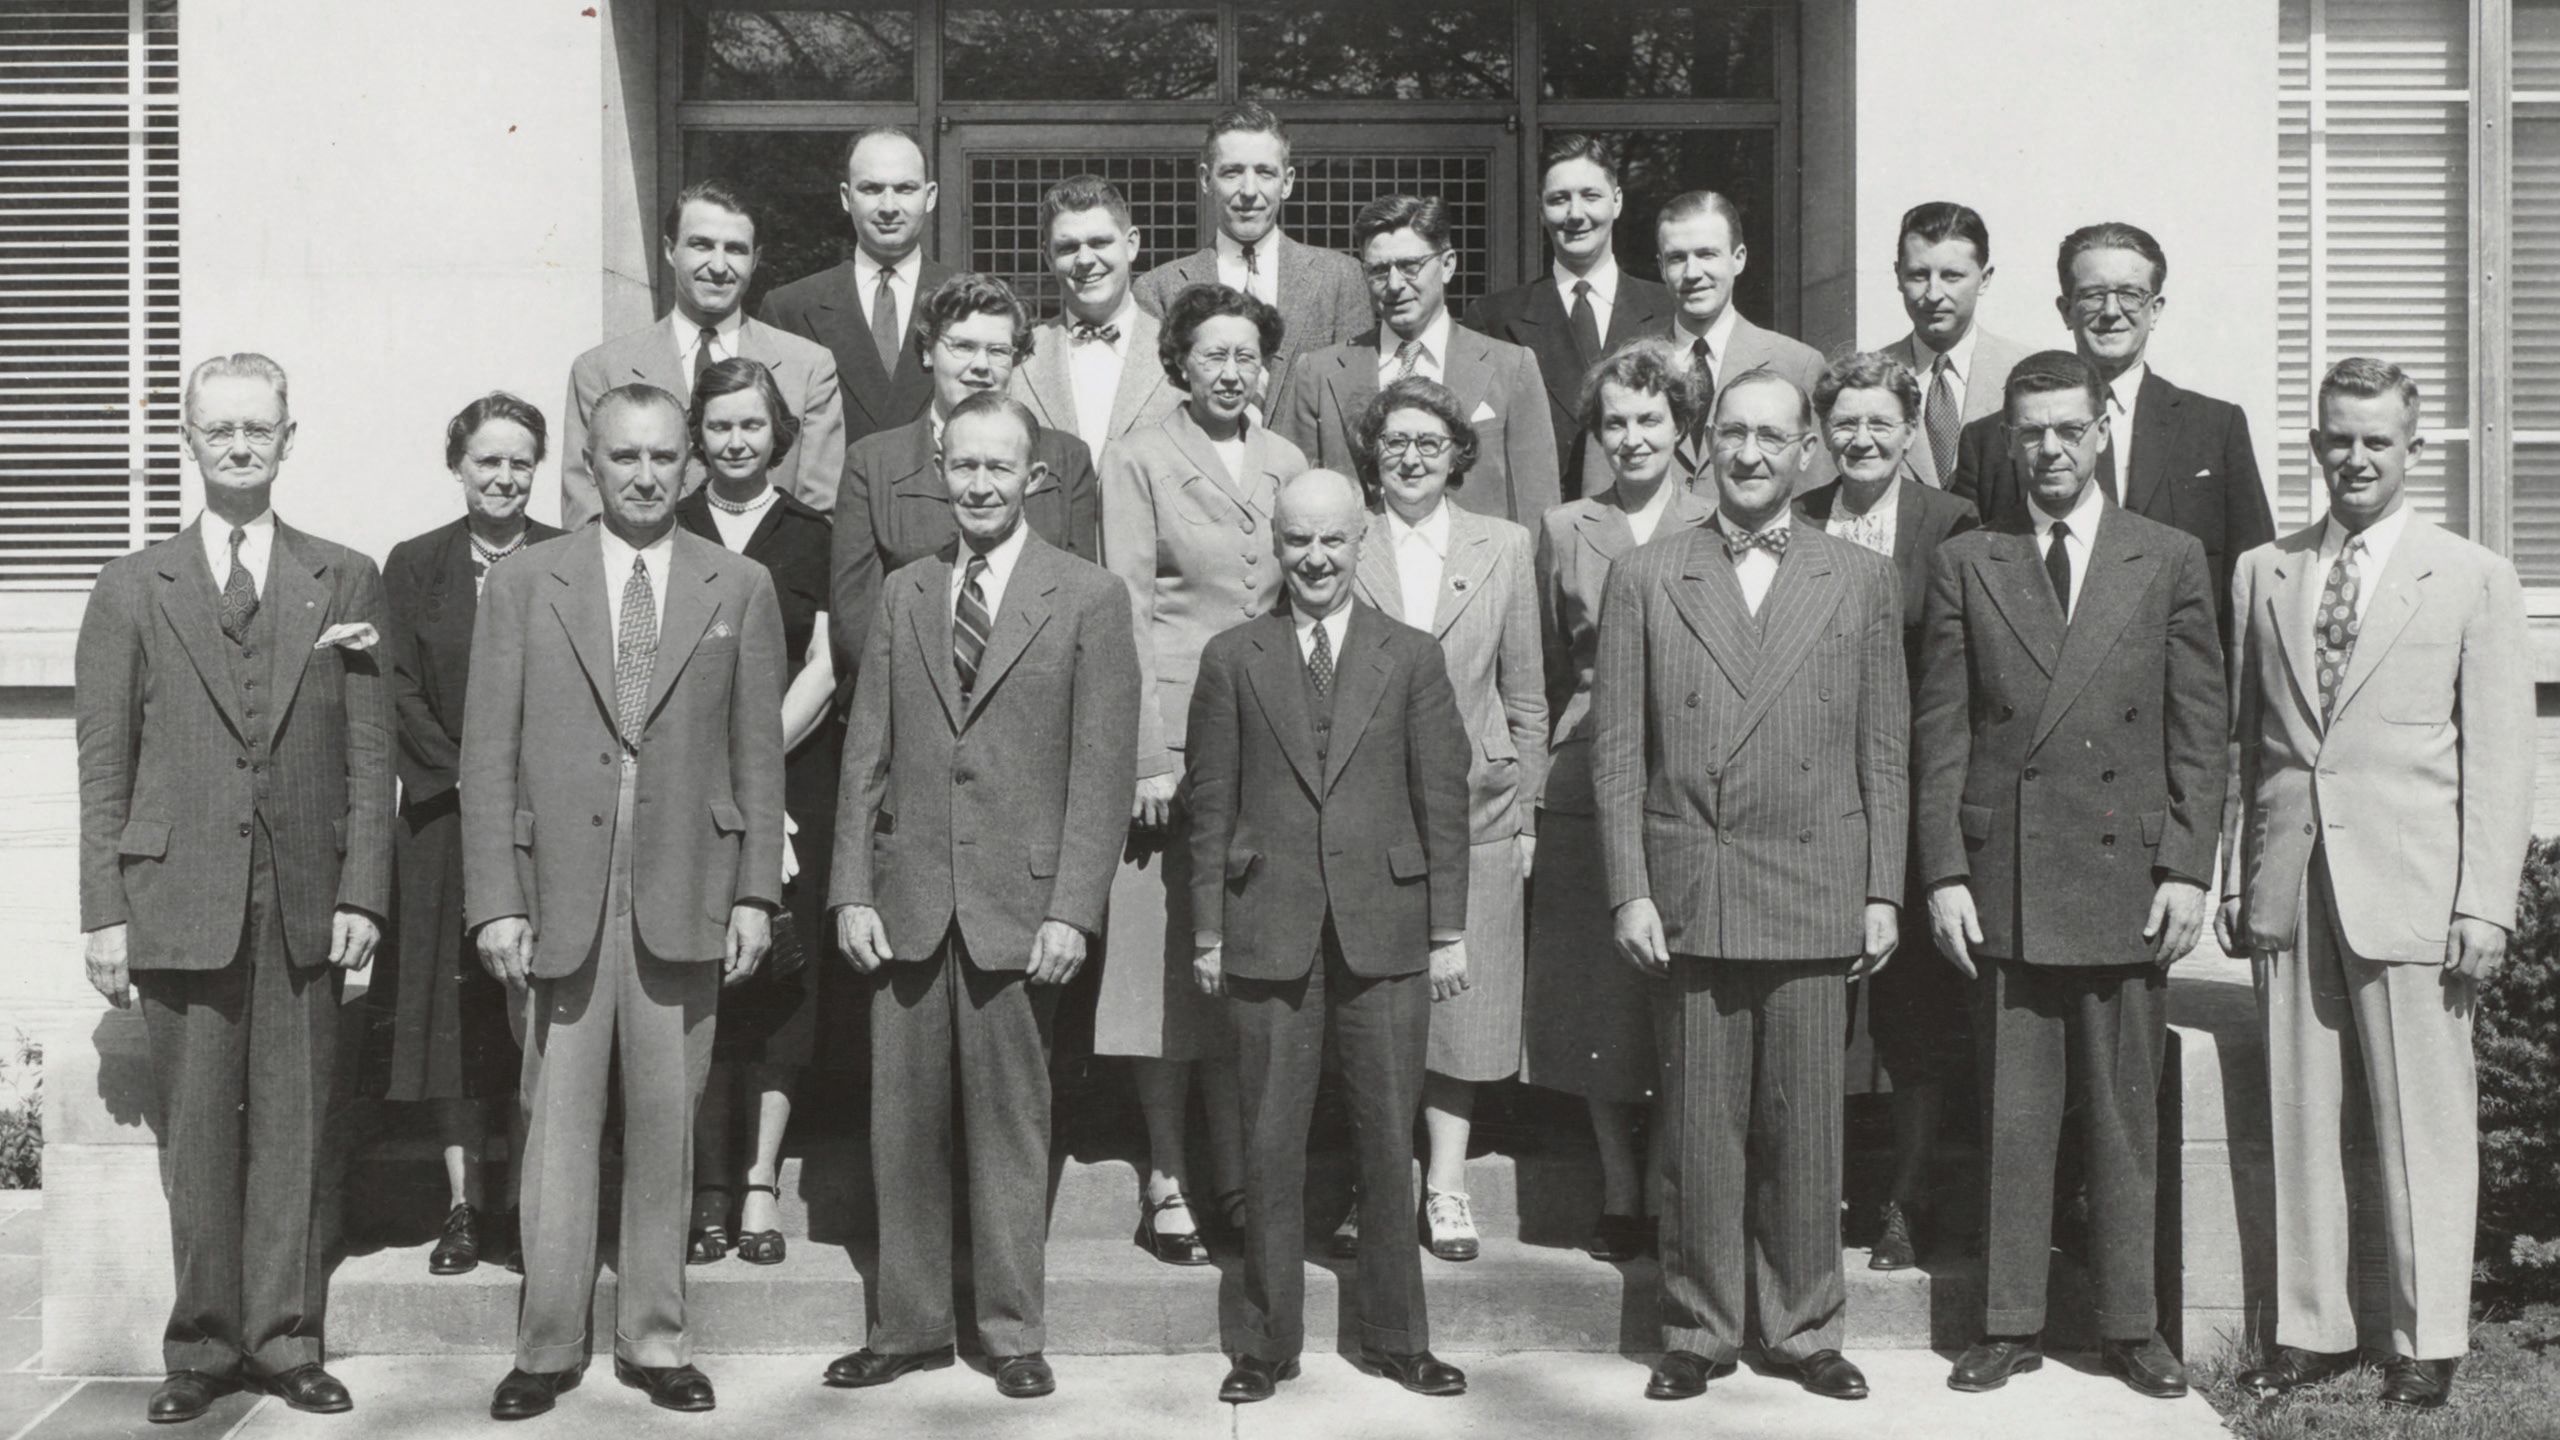 Dean Meek and his faculty in 1952 pose in front of a building. 